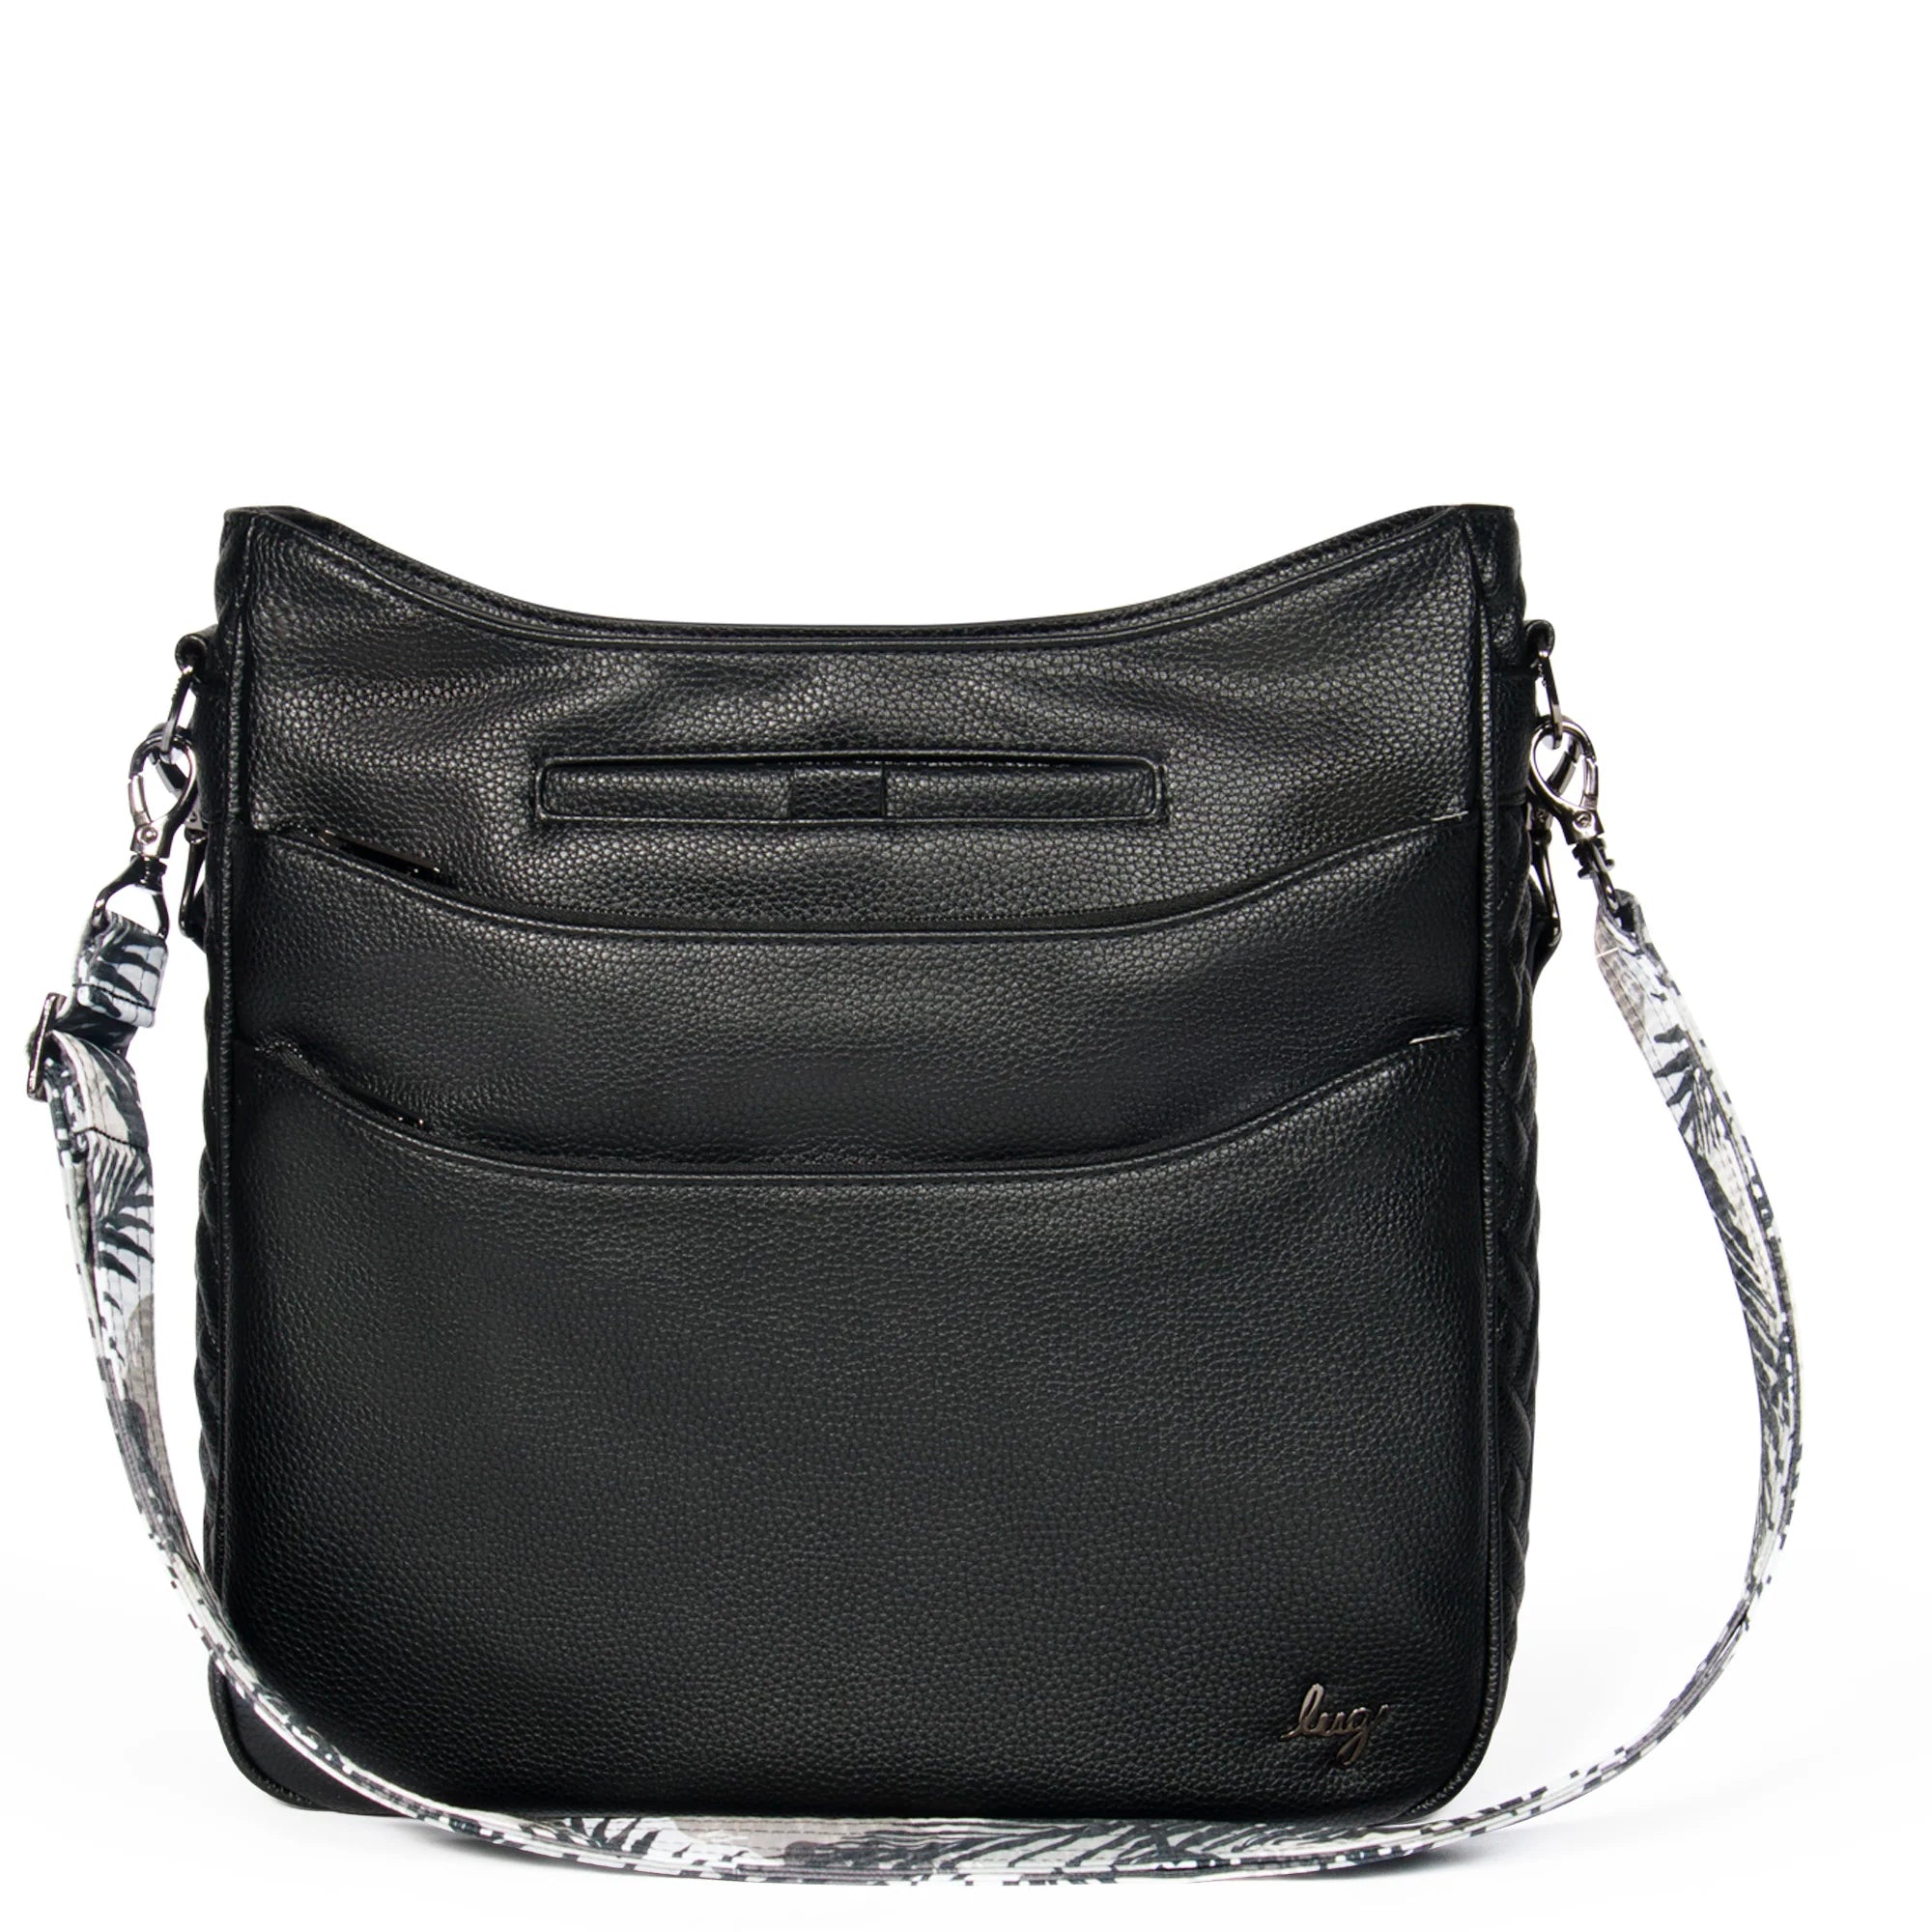 Lug Cable Car Vegan Leather Crossbody - Black/Abstract Ferns Strap - Blesket Canada